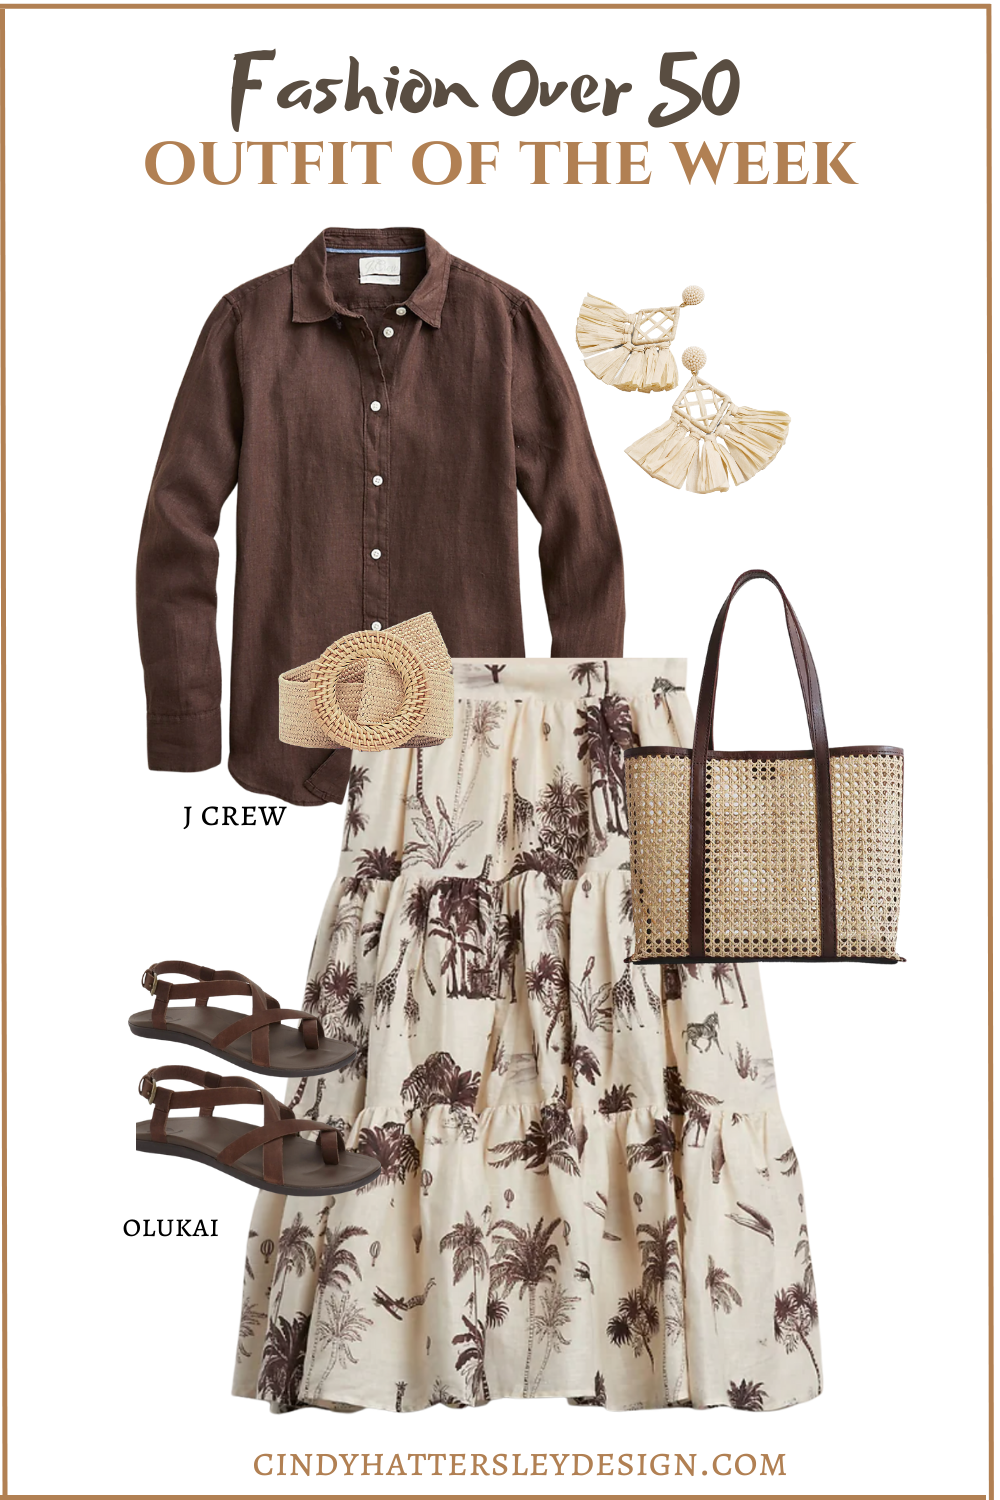 Cindy Hattersley's Outfit of the Week  featuring Banana Republic, Olukai, J Crew and Madewell